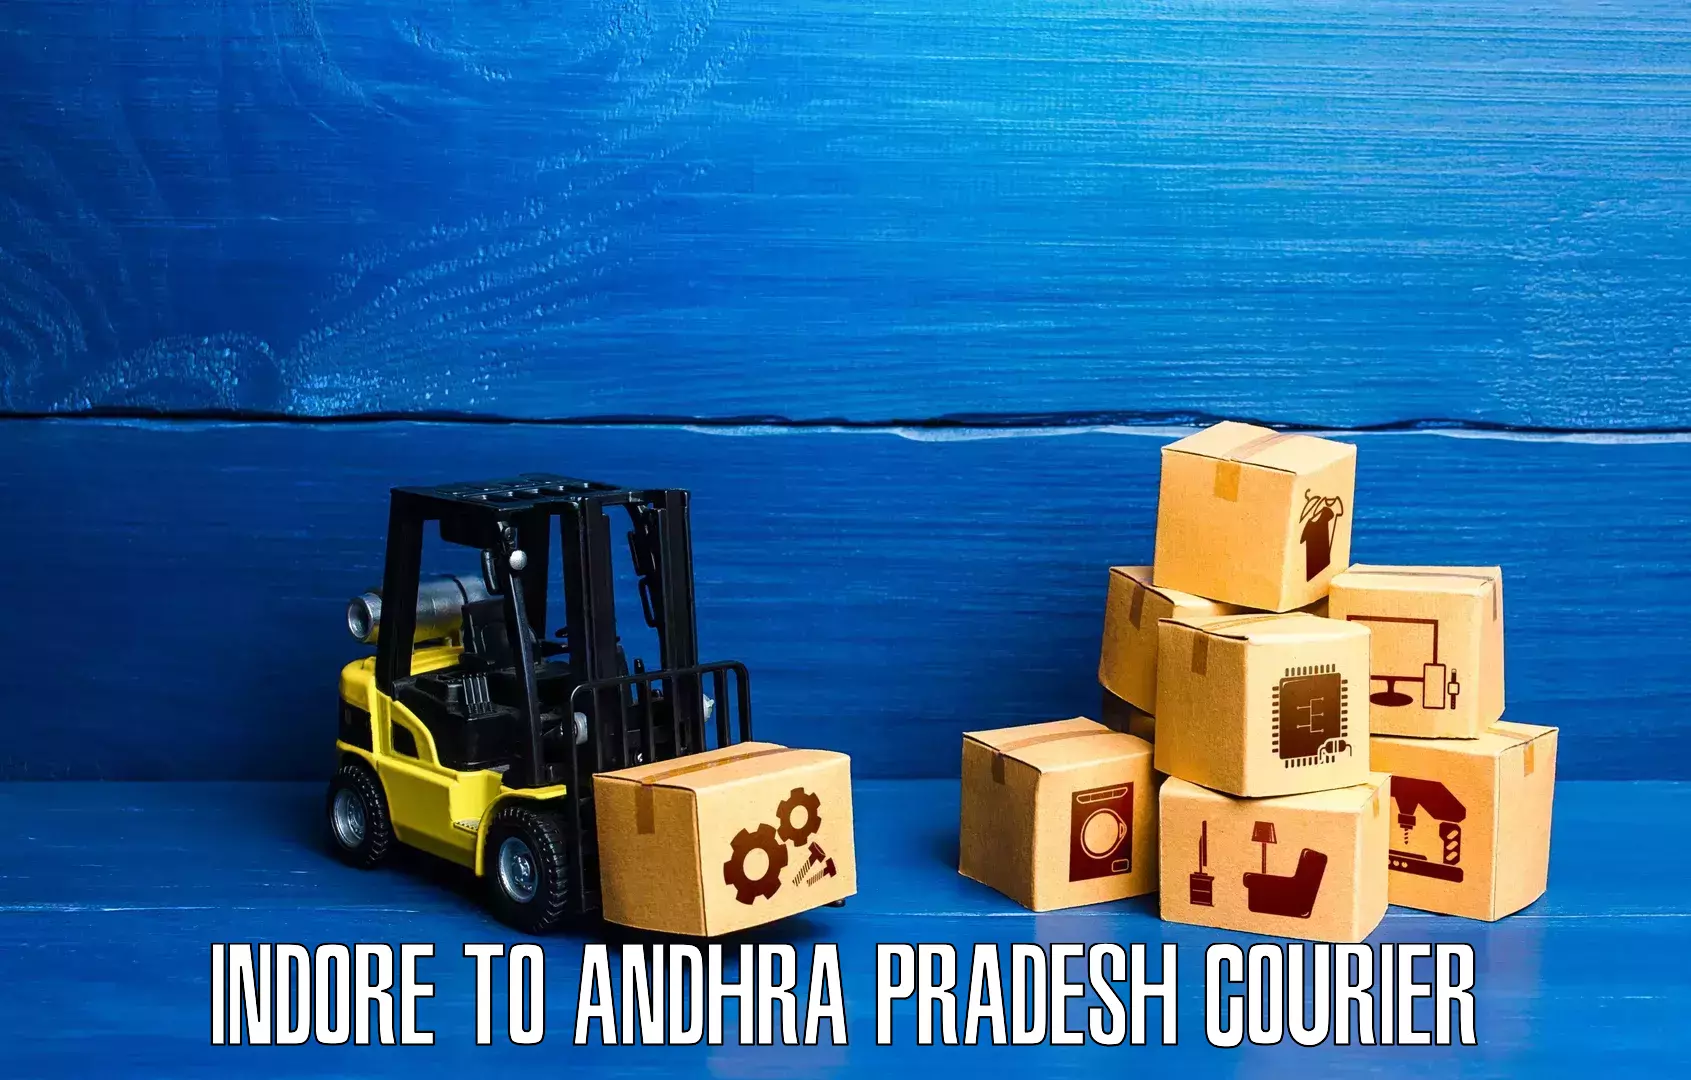 State-of-the-art courier technology Indore to Kuppam